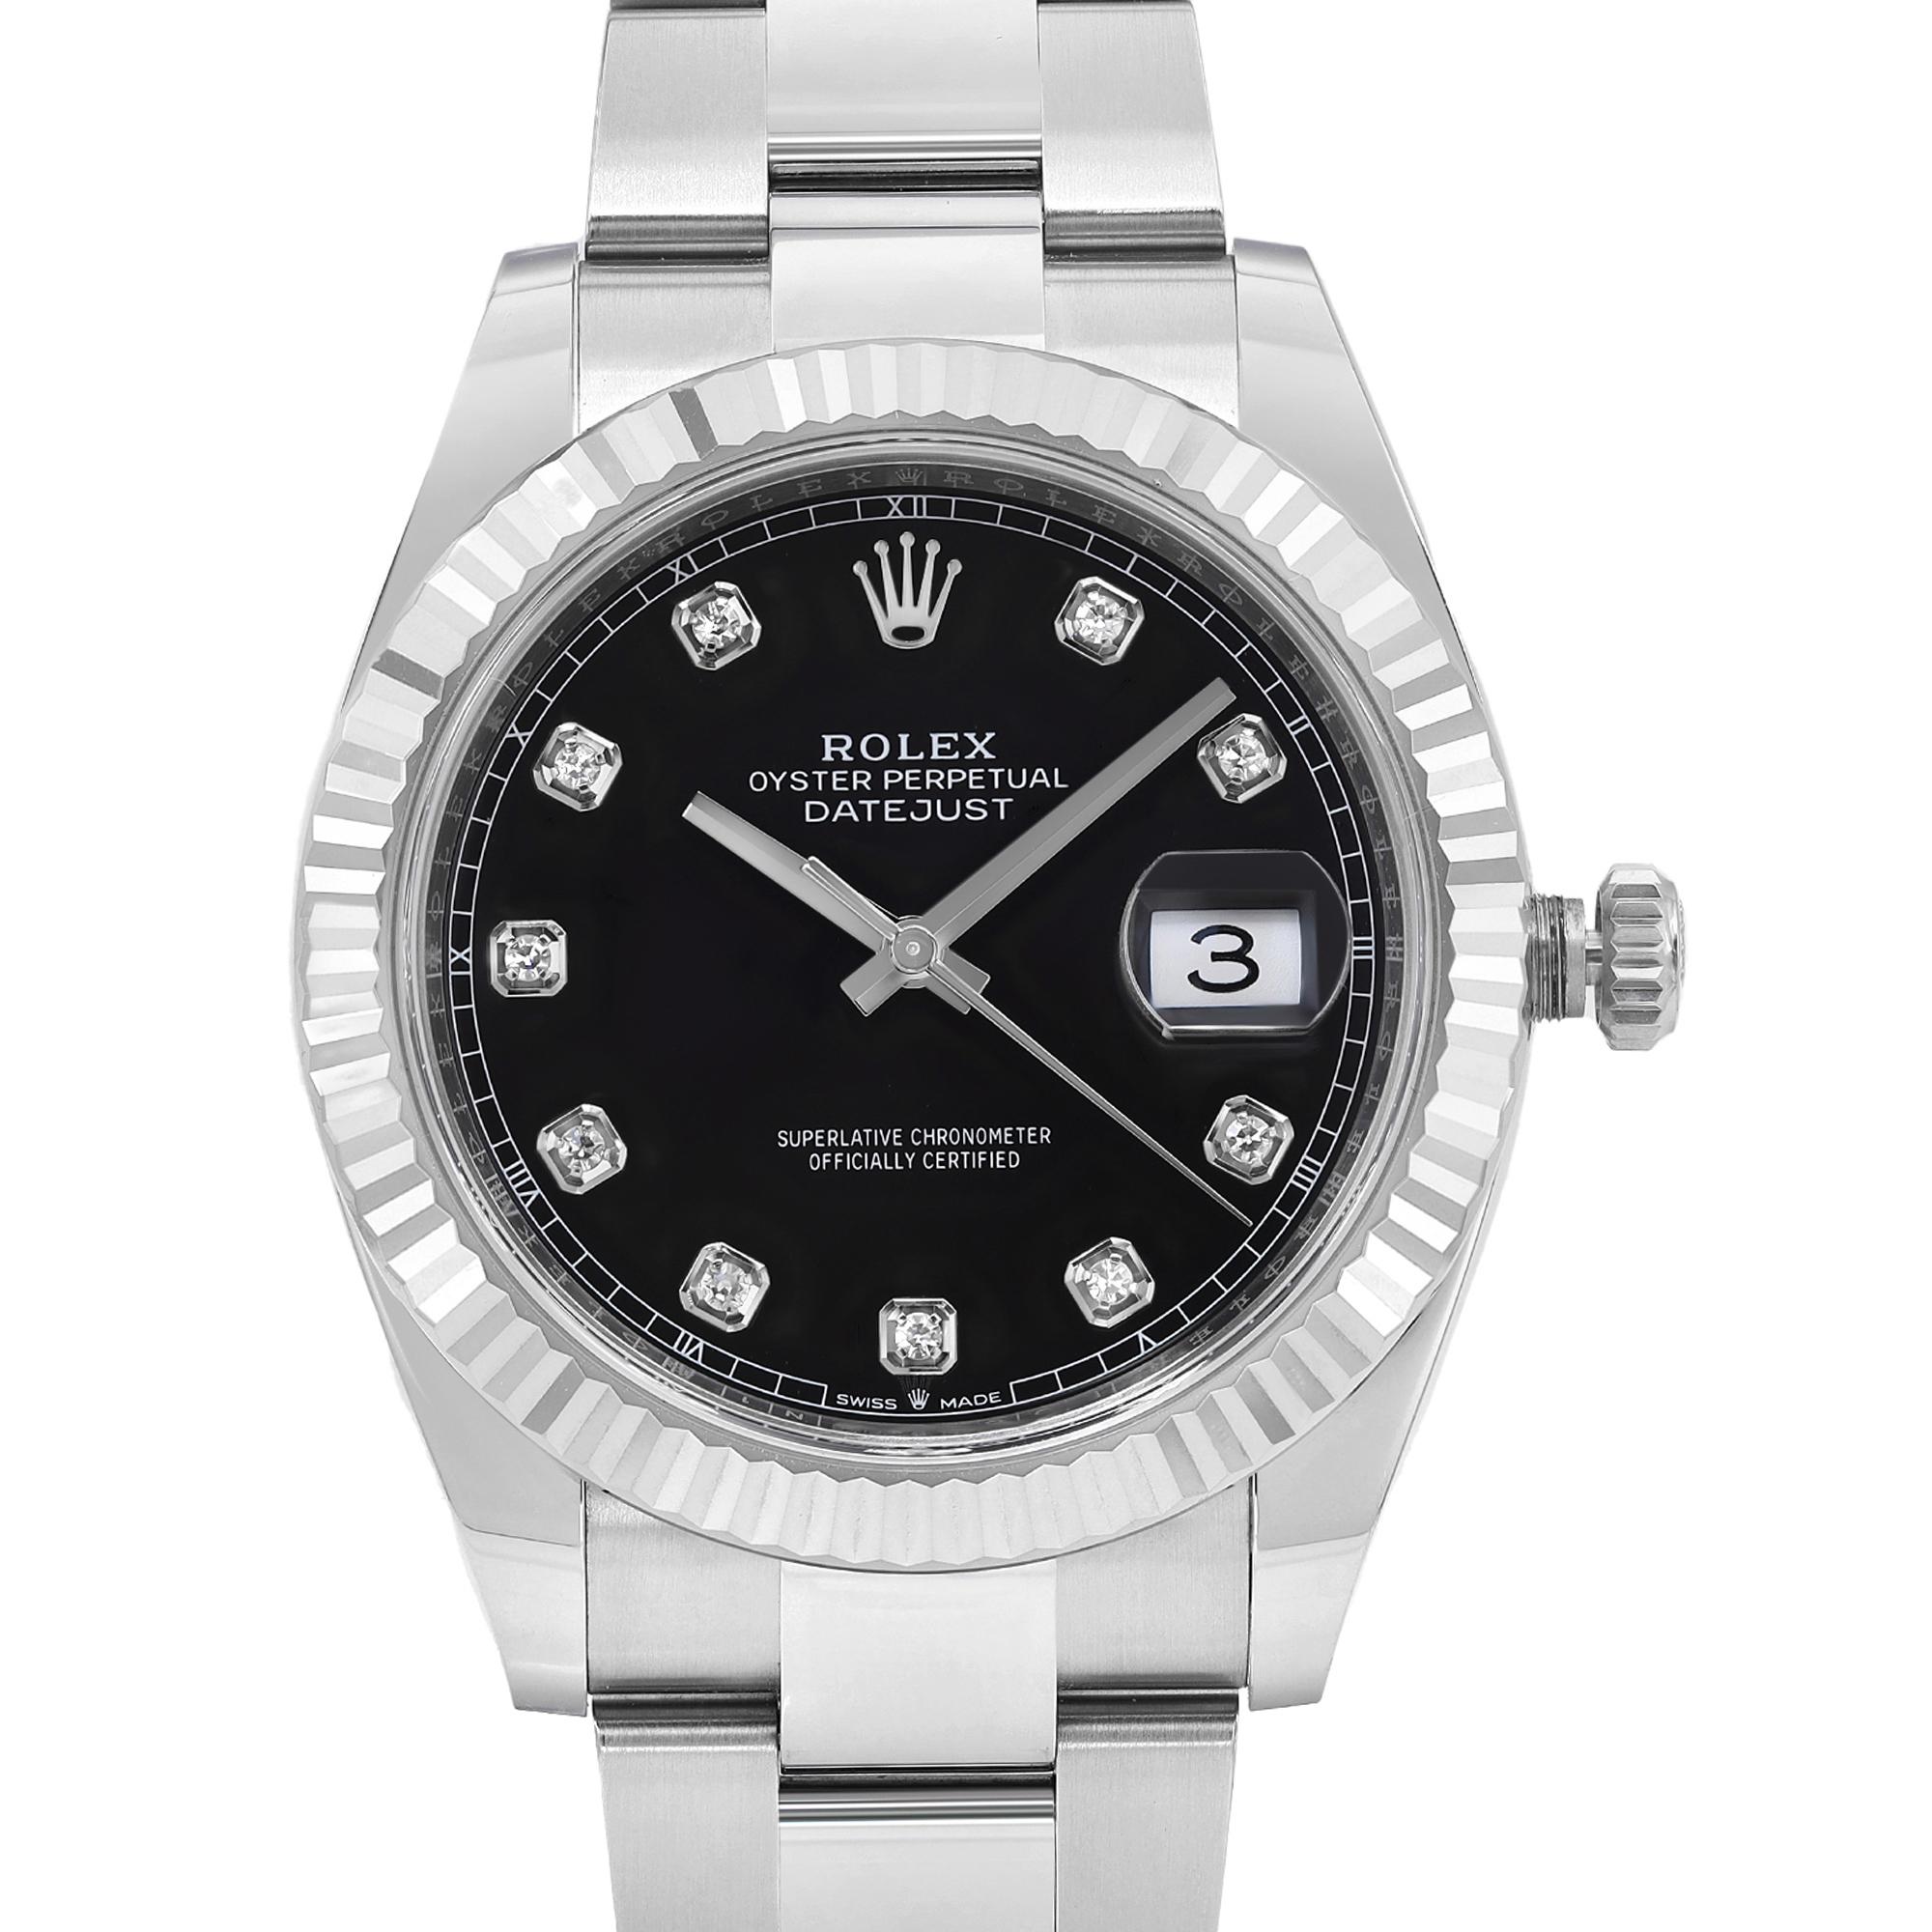 Pre-owned. Original box and papers are included. 

Brand Information:
Brand: Rolex
Country/Region of Manufacture: Switzerland

Watch Type:
Type: Wristwatch
Department: Men
Style: Luxury

Model Information:
Model Number: 126334
Model: Rolex Datejust